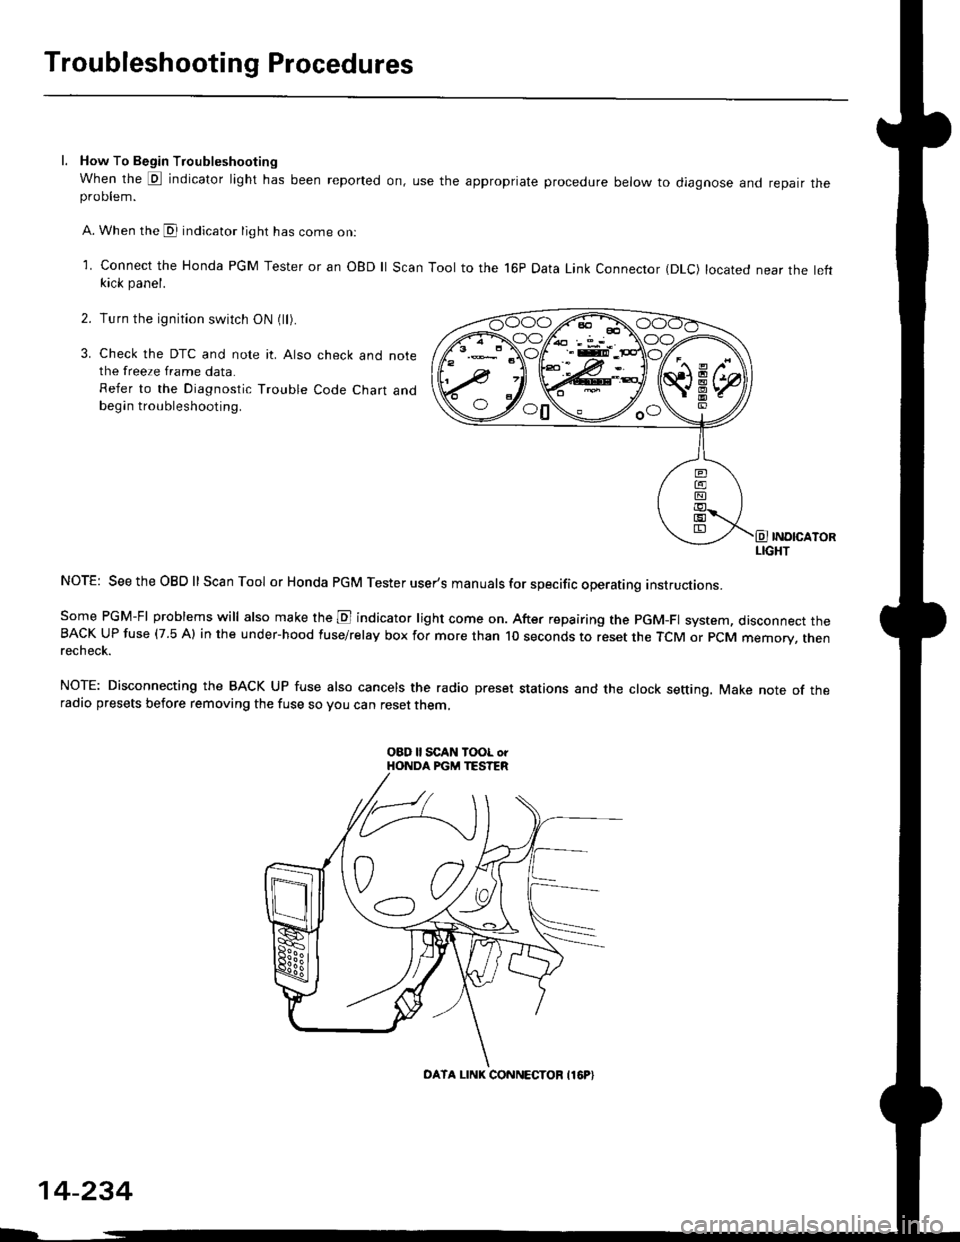 HONDA CIVIC 1996 6.G Workshop Manual Troubleshooting Procedures
l. How To Begin Troubleshooting
When the E indicator light has been reported on, use the appropriate procedure below to diagnose and repatr theproDlem.
A. When the @ indicat